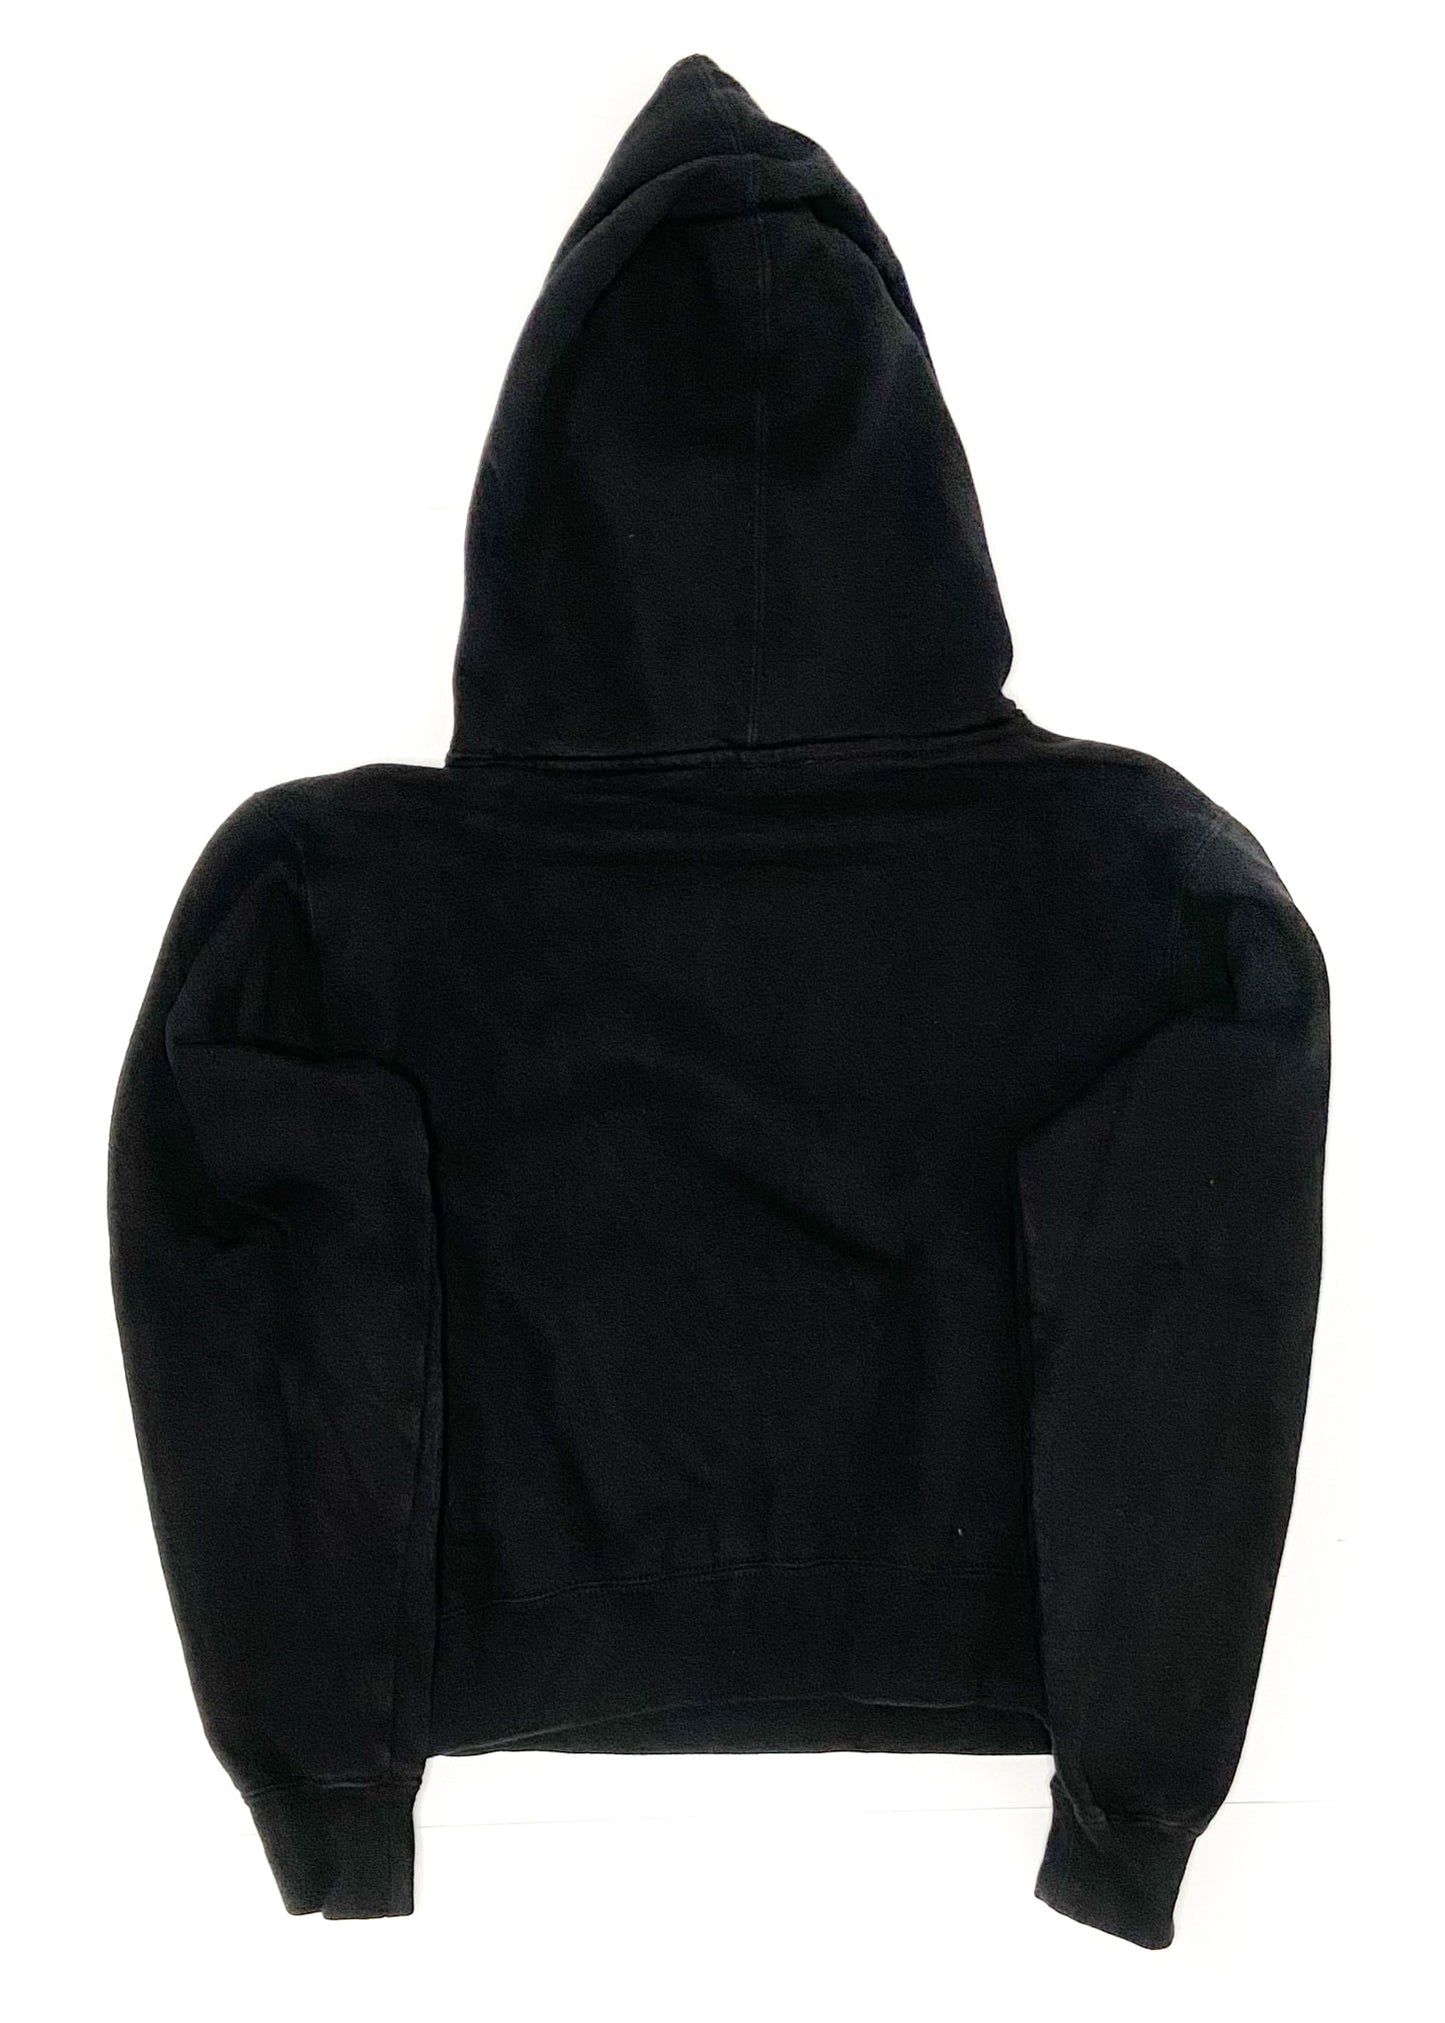 Farm Girl Authentic Brand Hoodie - Black - Youth Small